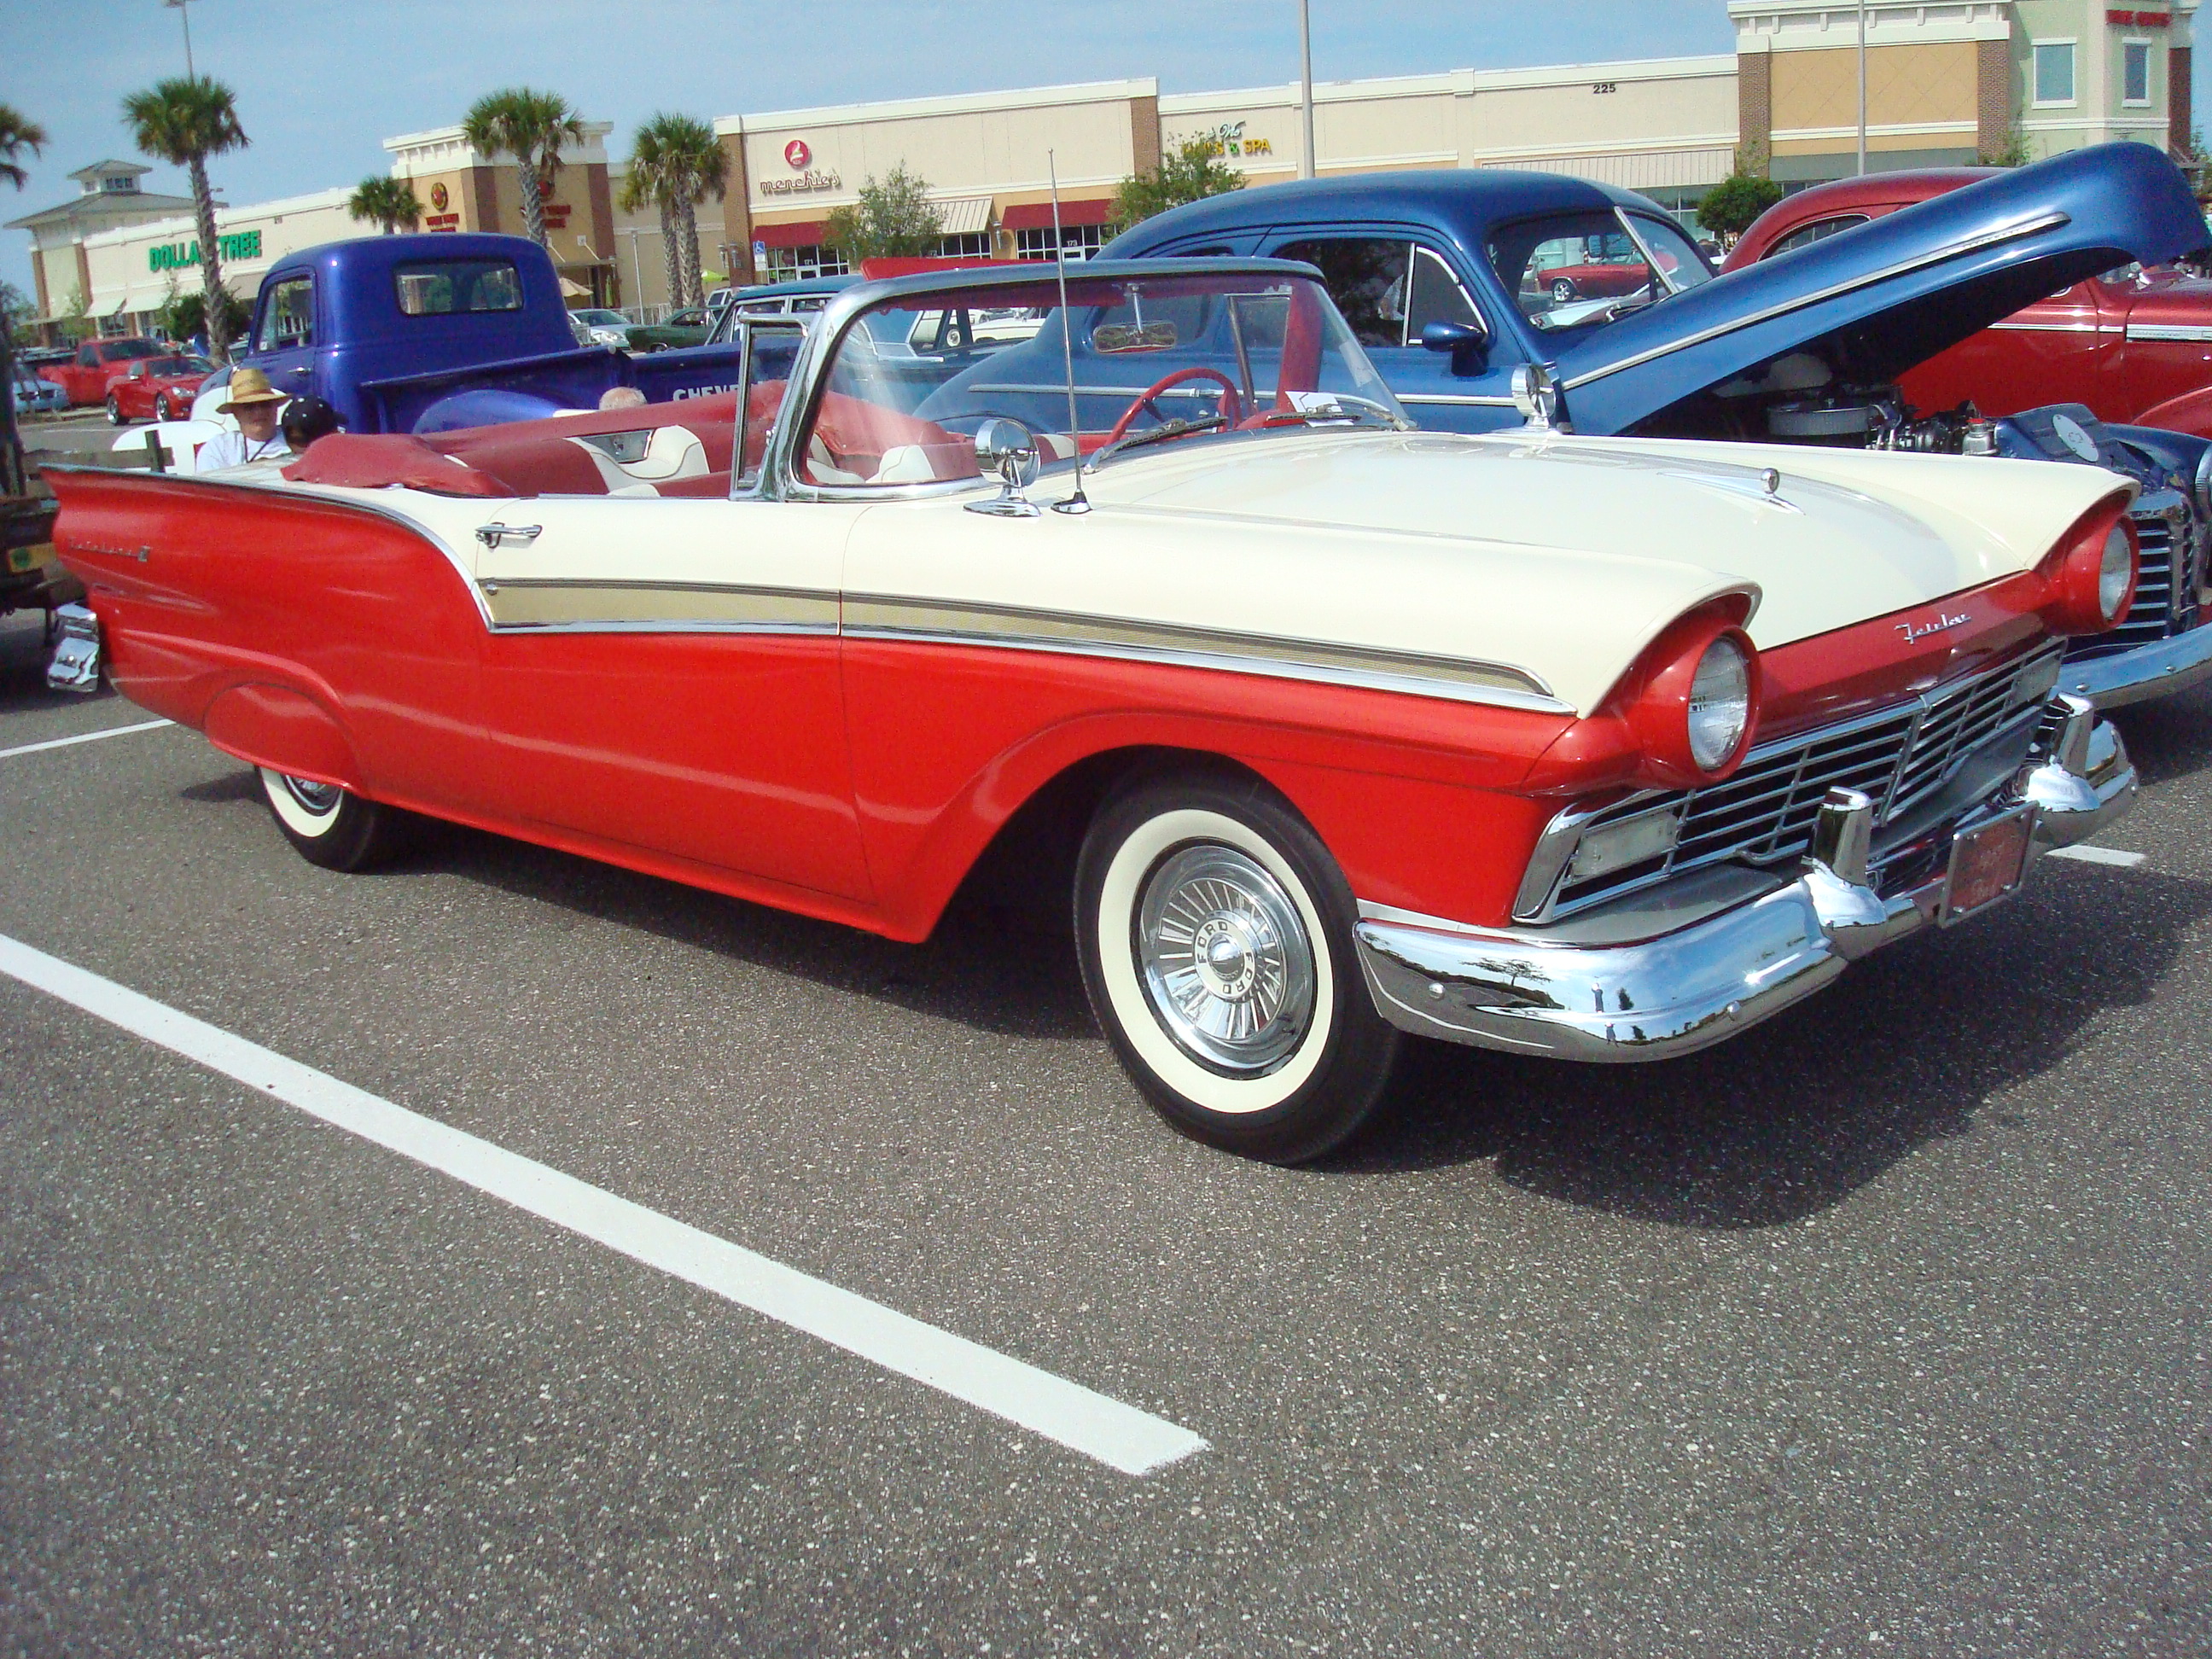 Howard's 1957 Ford Convertible